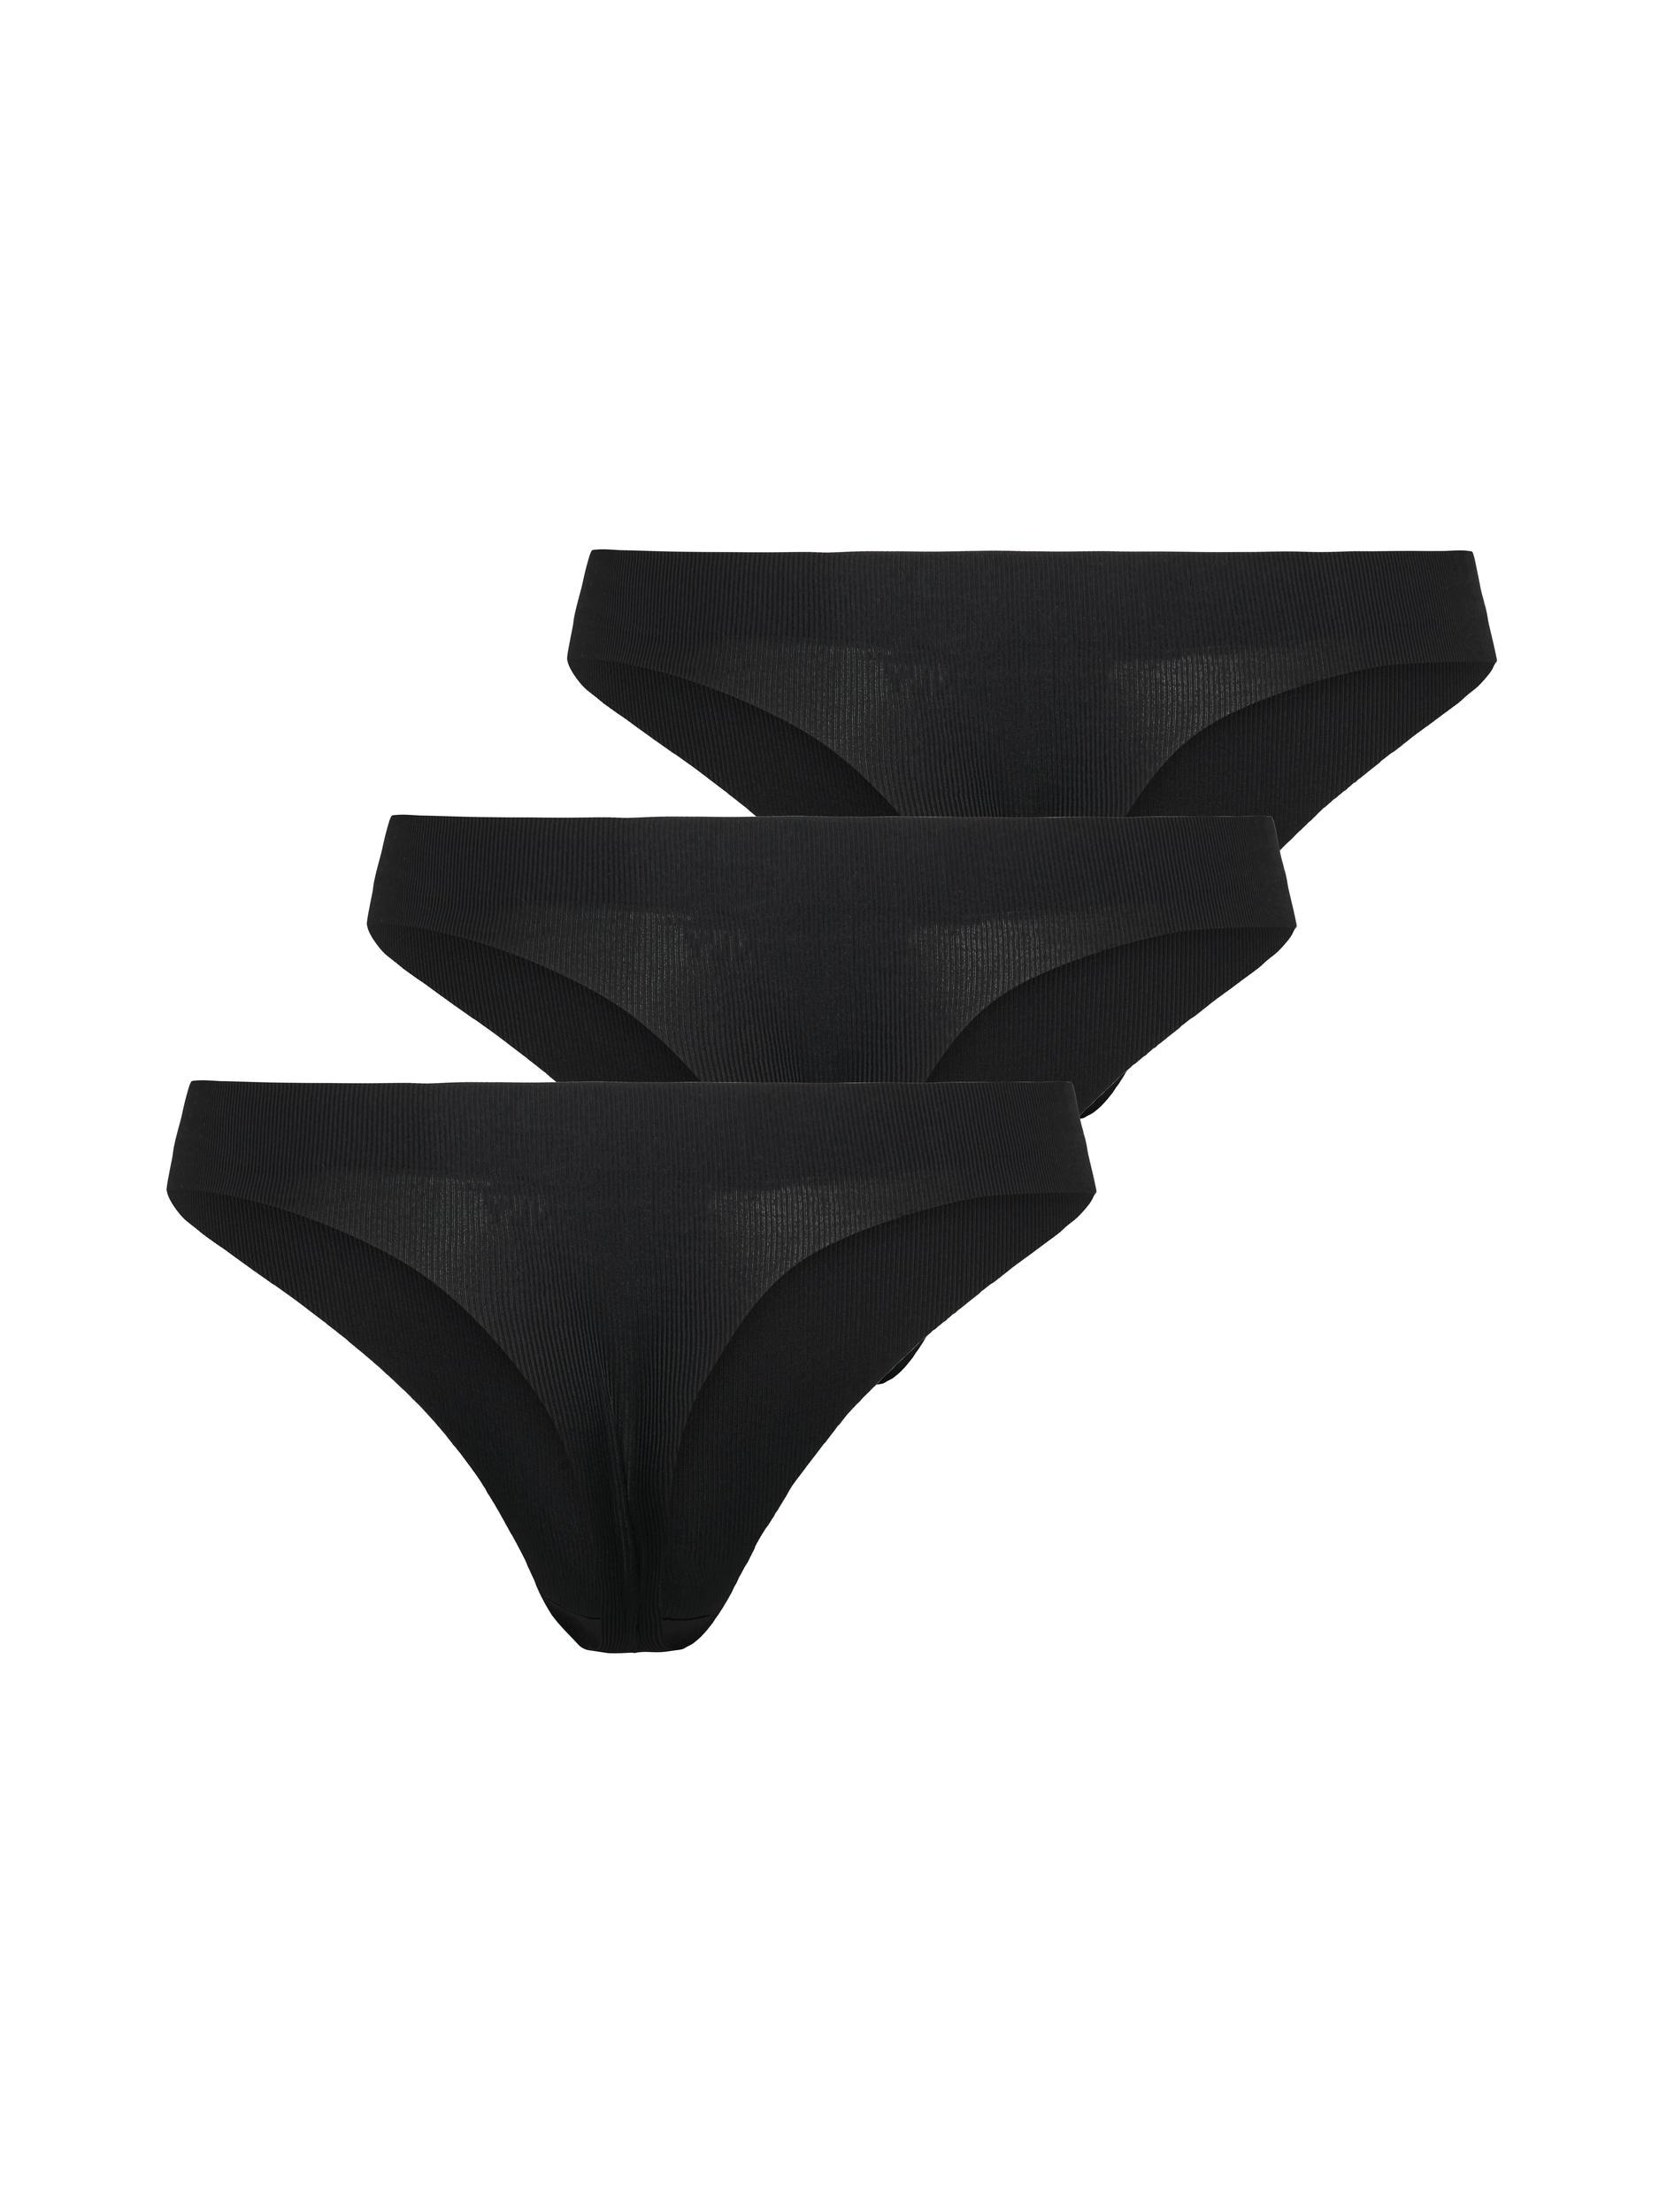 3-PACK bestellen RIB INVISIBLE String BAUR THONG«, St.) (Set, »ONLTRACY | 3 ONLY